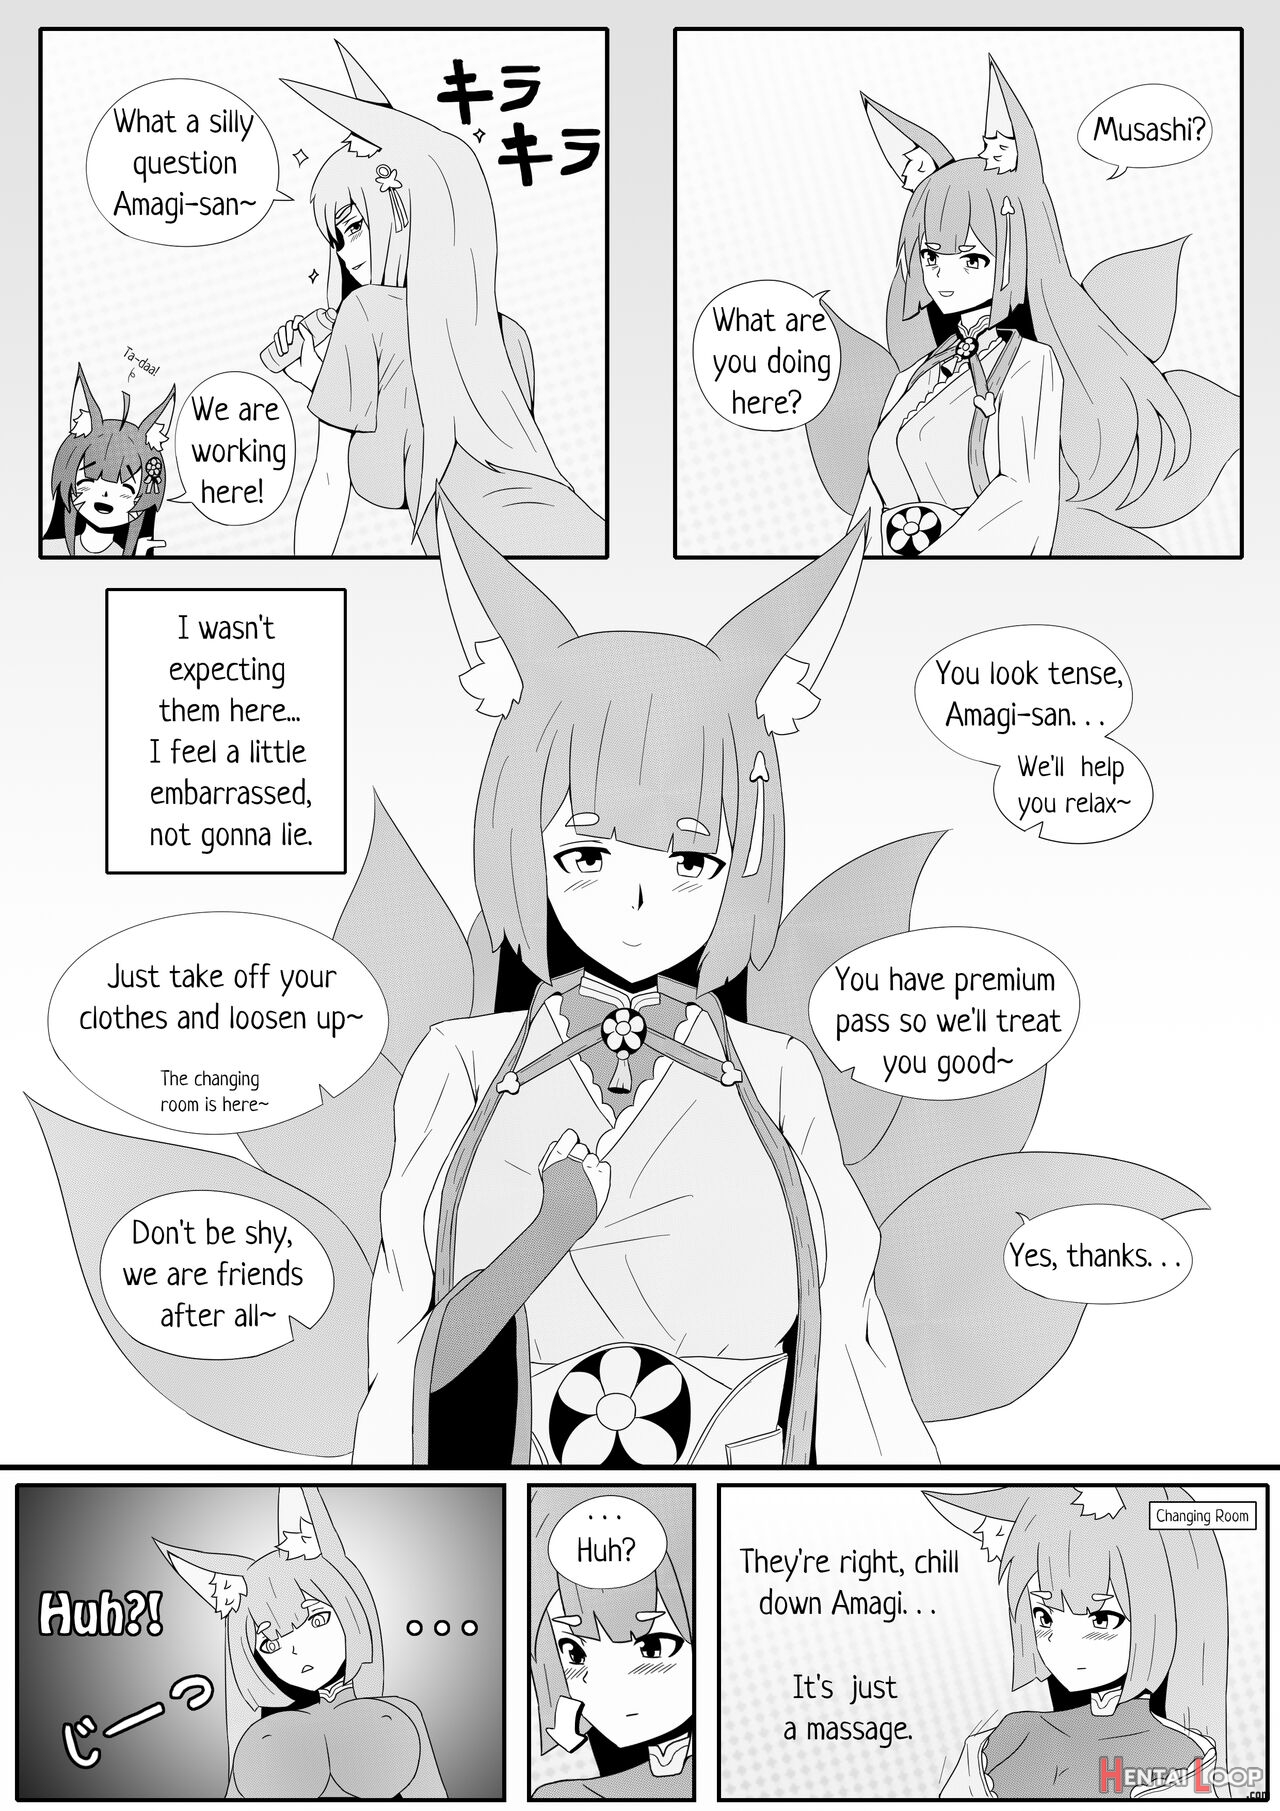 Amagi’s Very Special Massage page 3